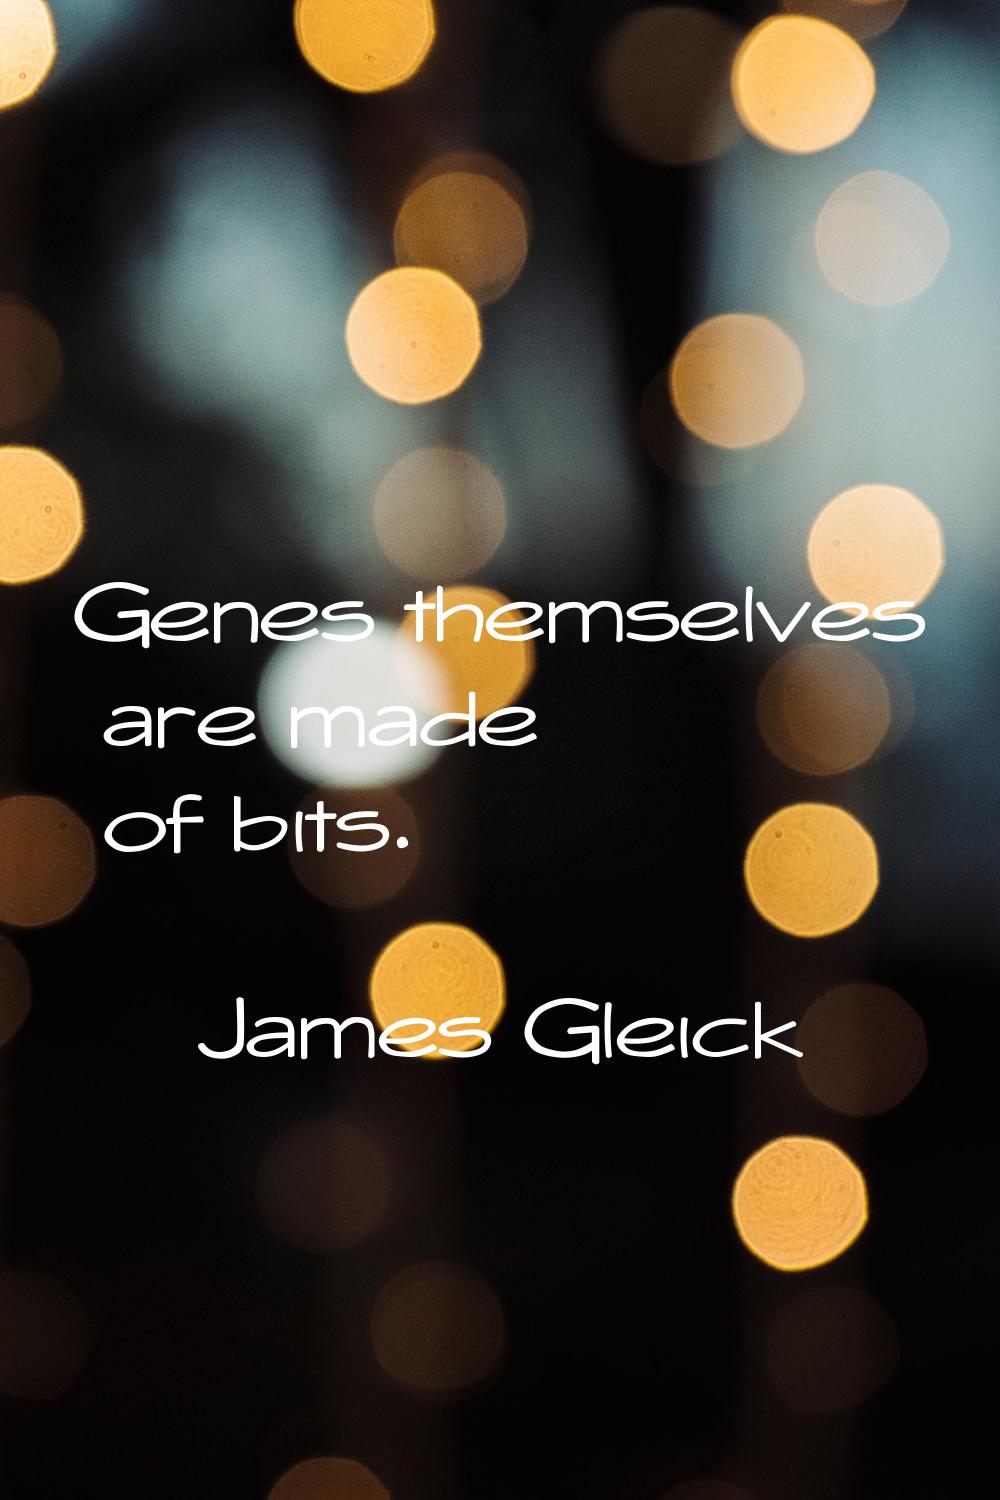 Genes themselves are made of bits.